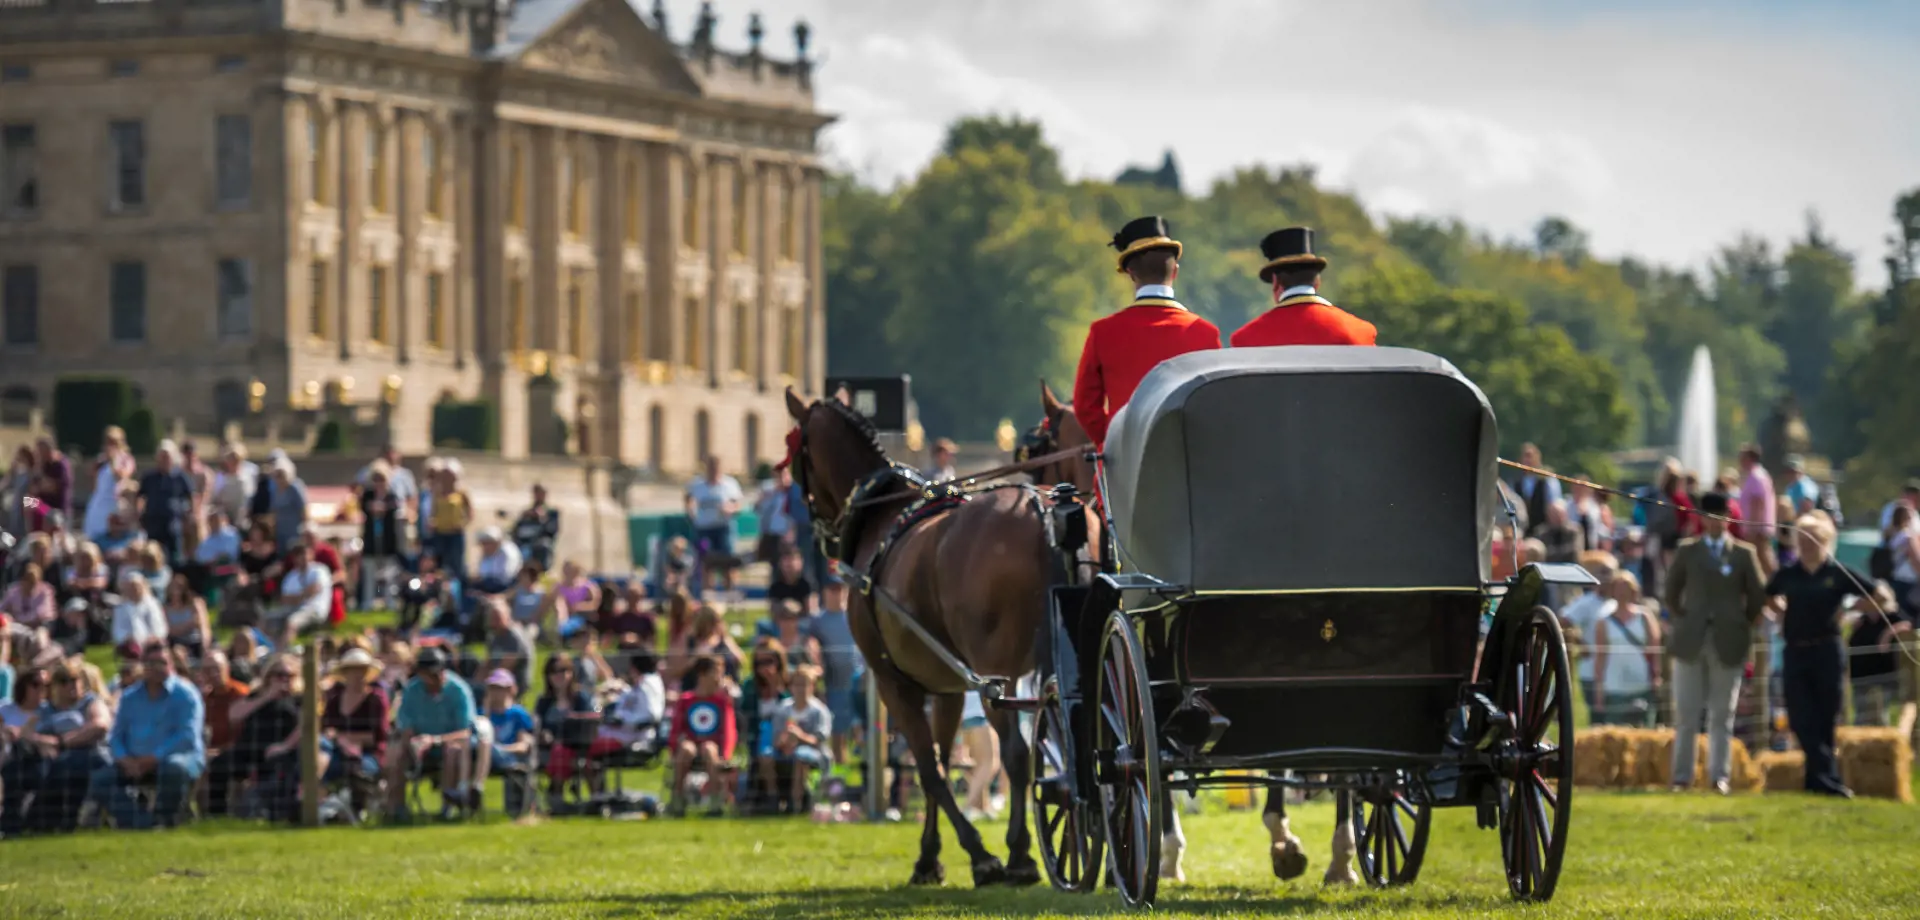 All the fun of the Chatsworth Country Fair